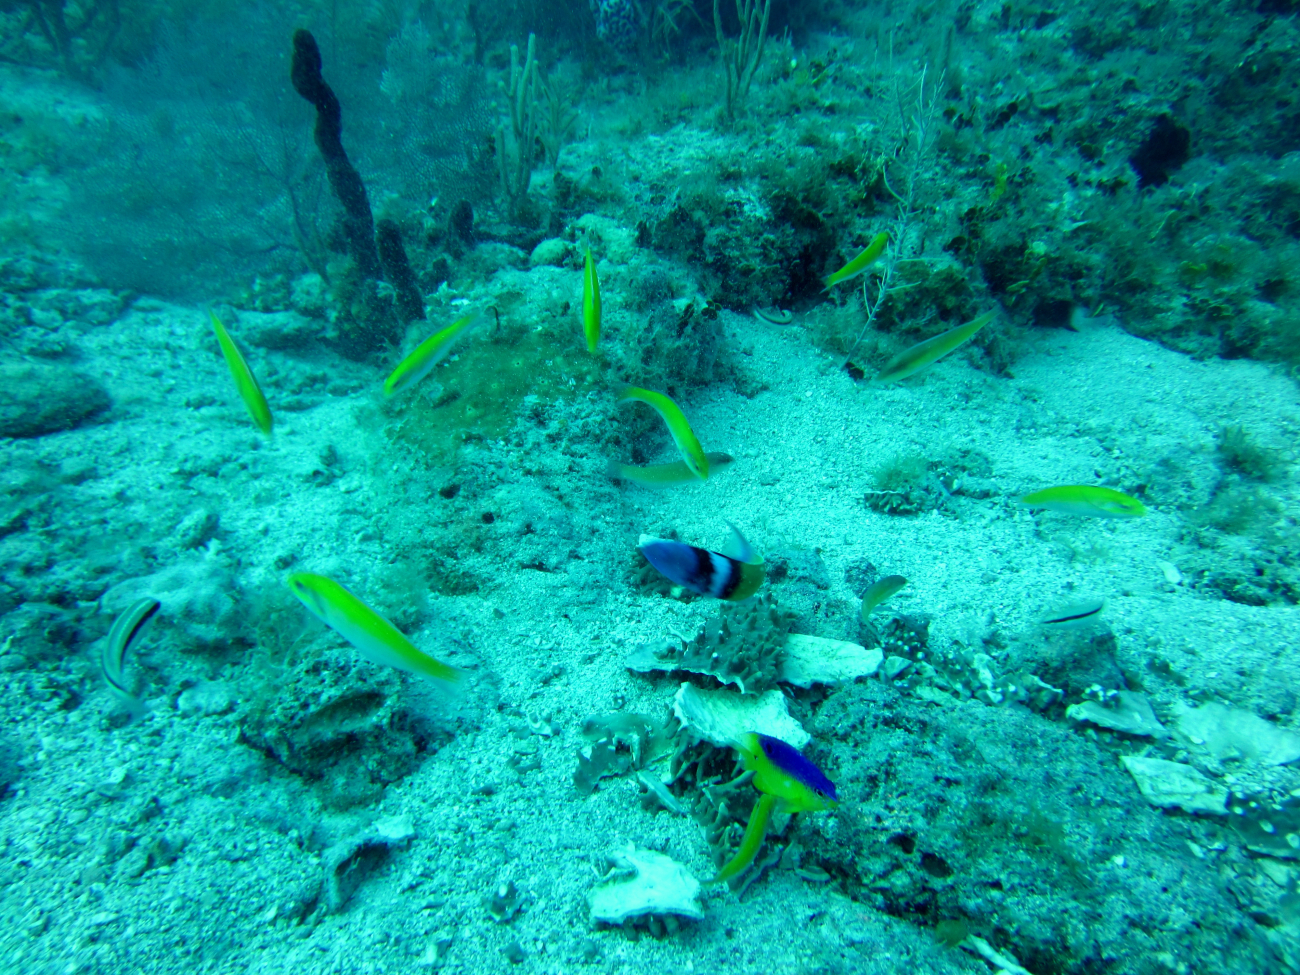 Blueheads, a beaugregorie, and other fish are seen milling about in this image